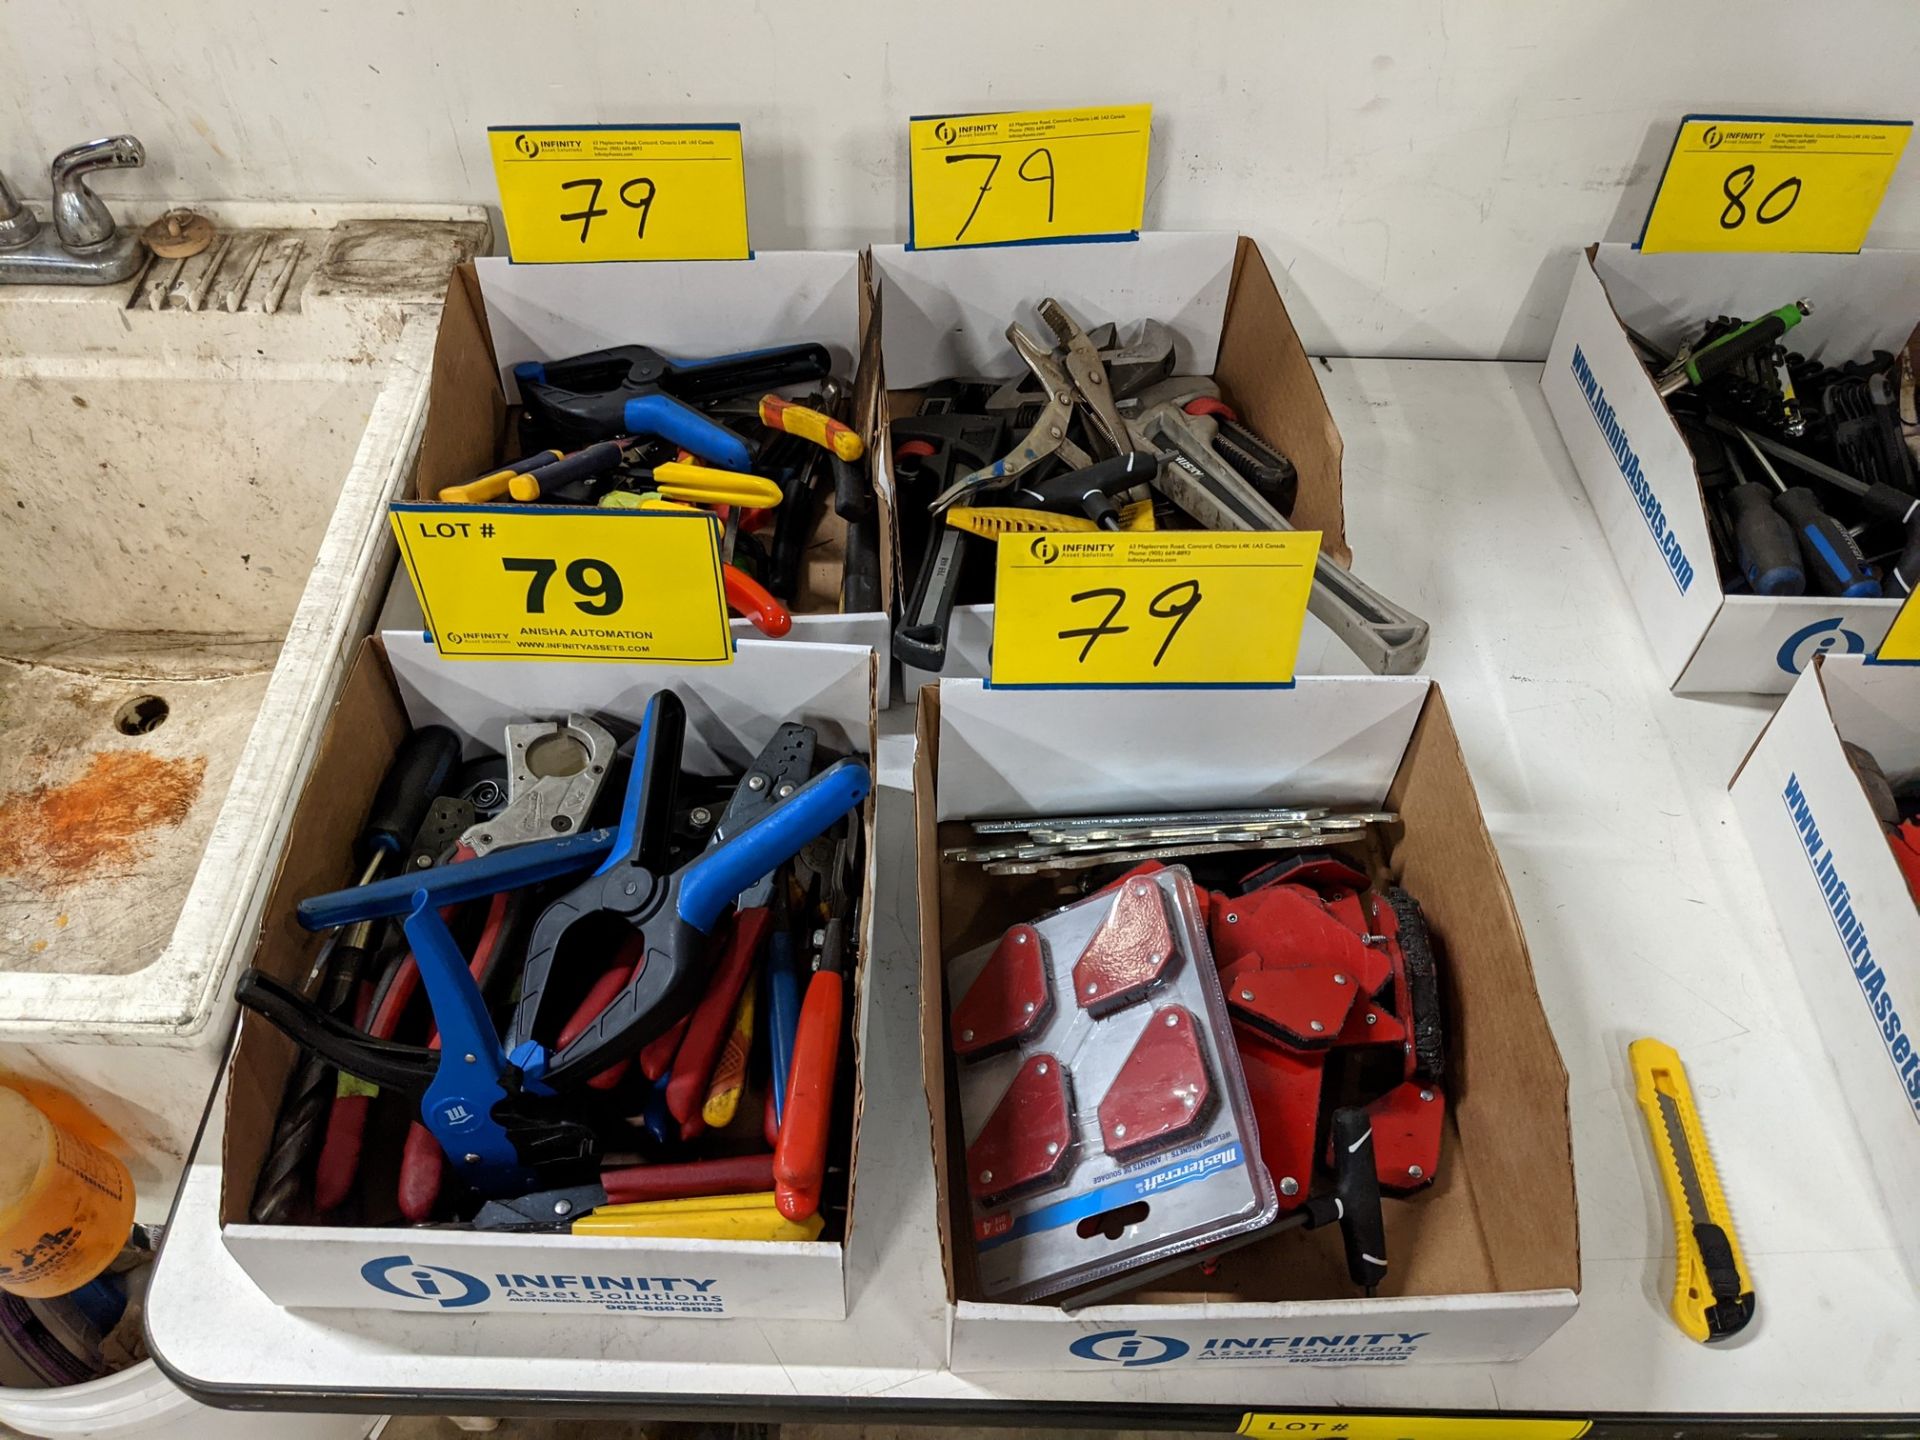 LOT PIPE WRENCHES, MAGNETS, WIRE CUTTERS, PLIERS, EC. (4 BOXES)